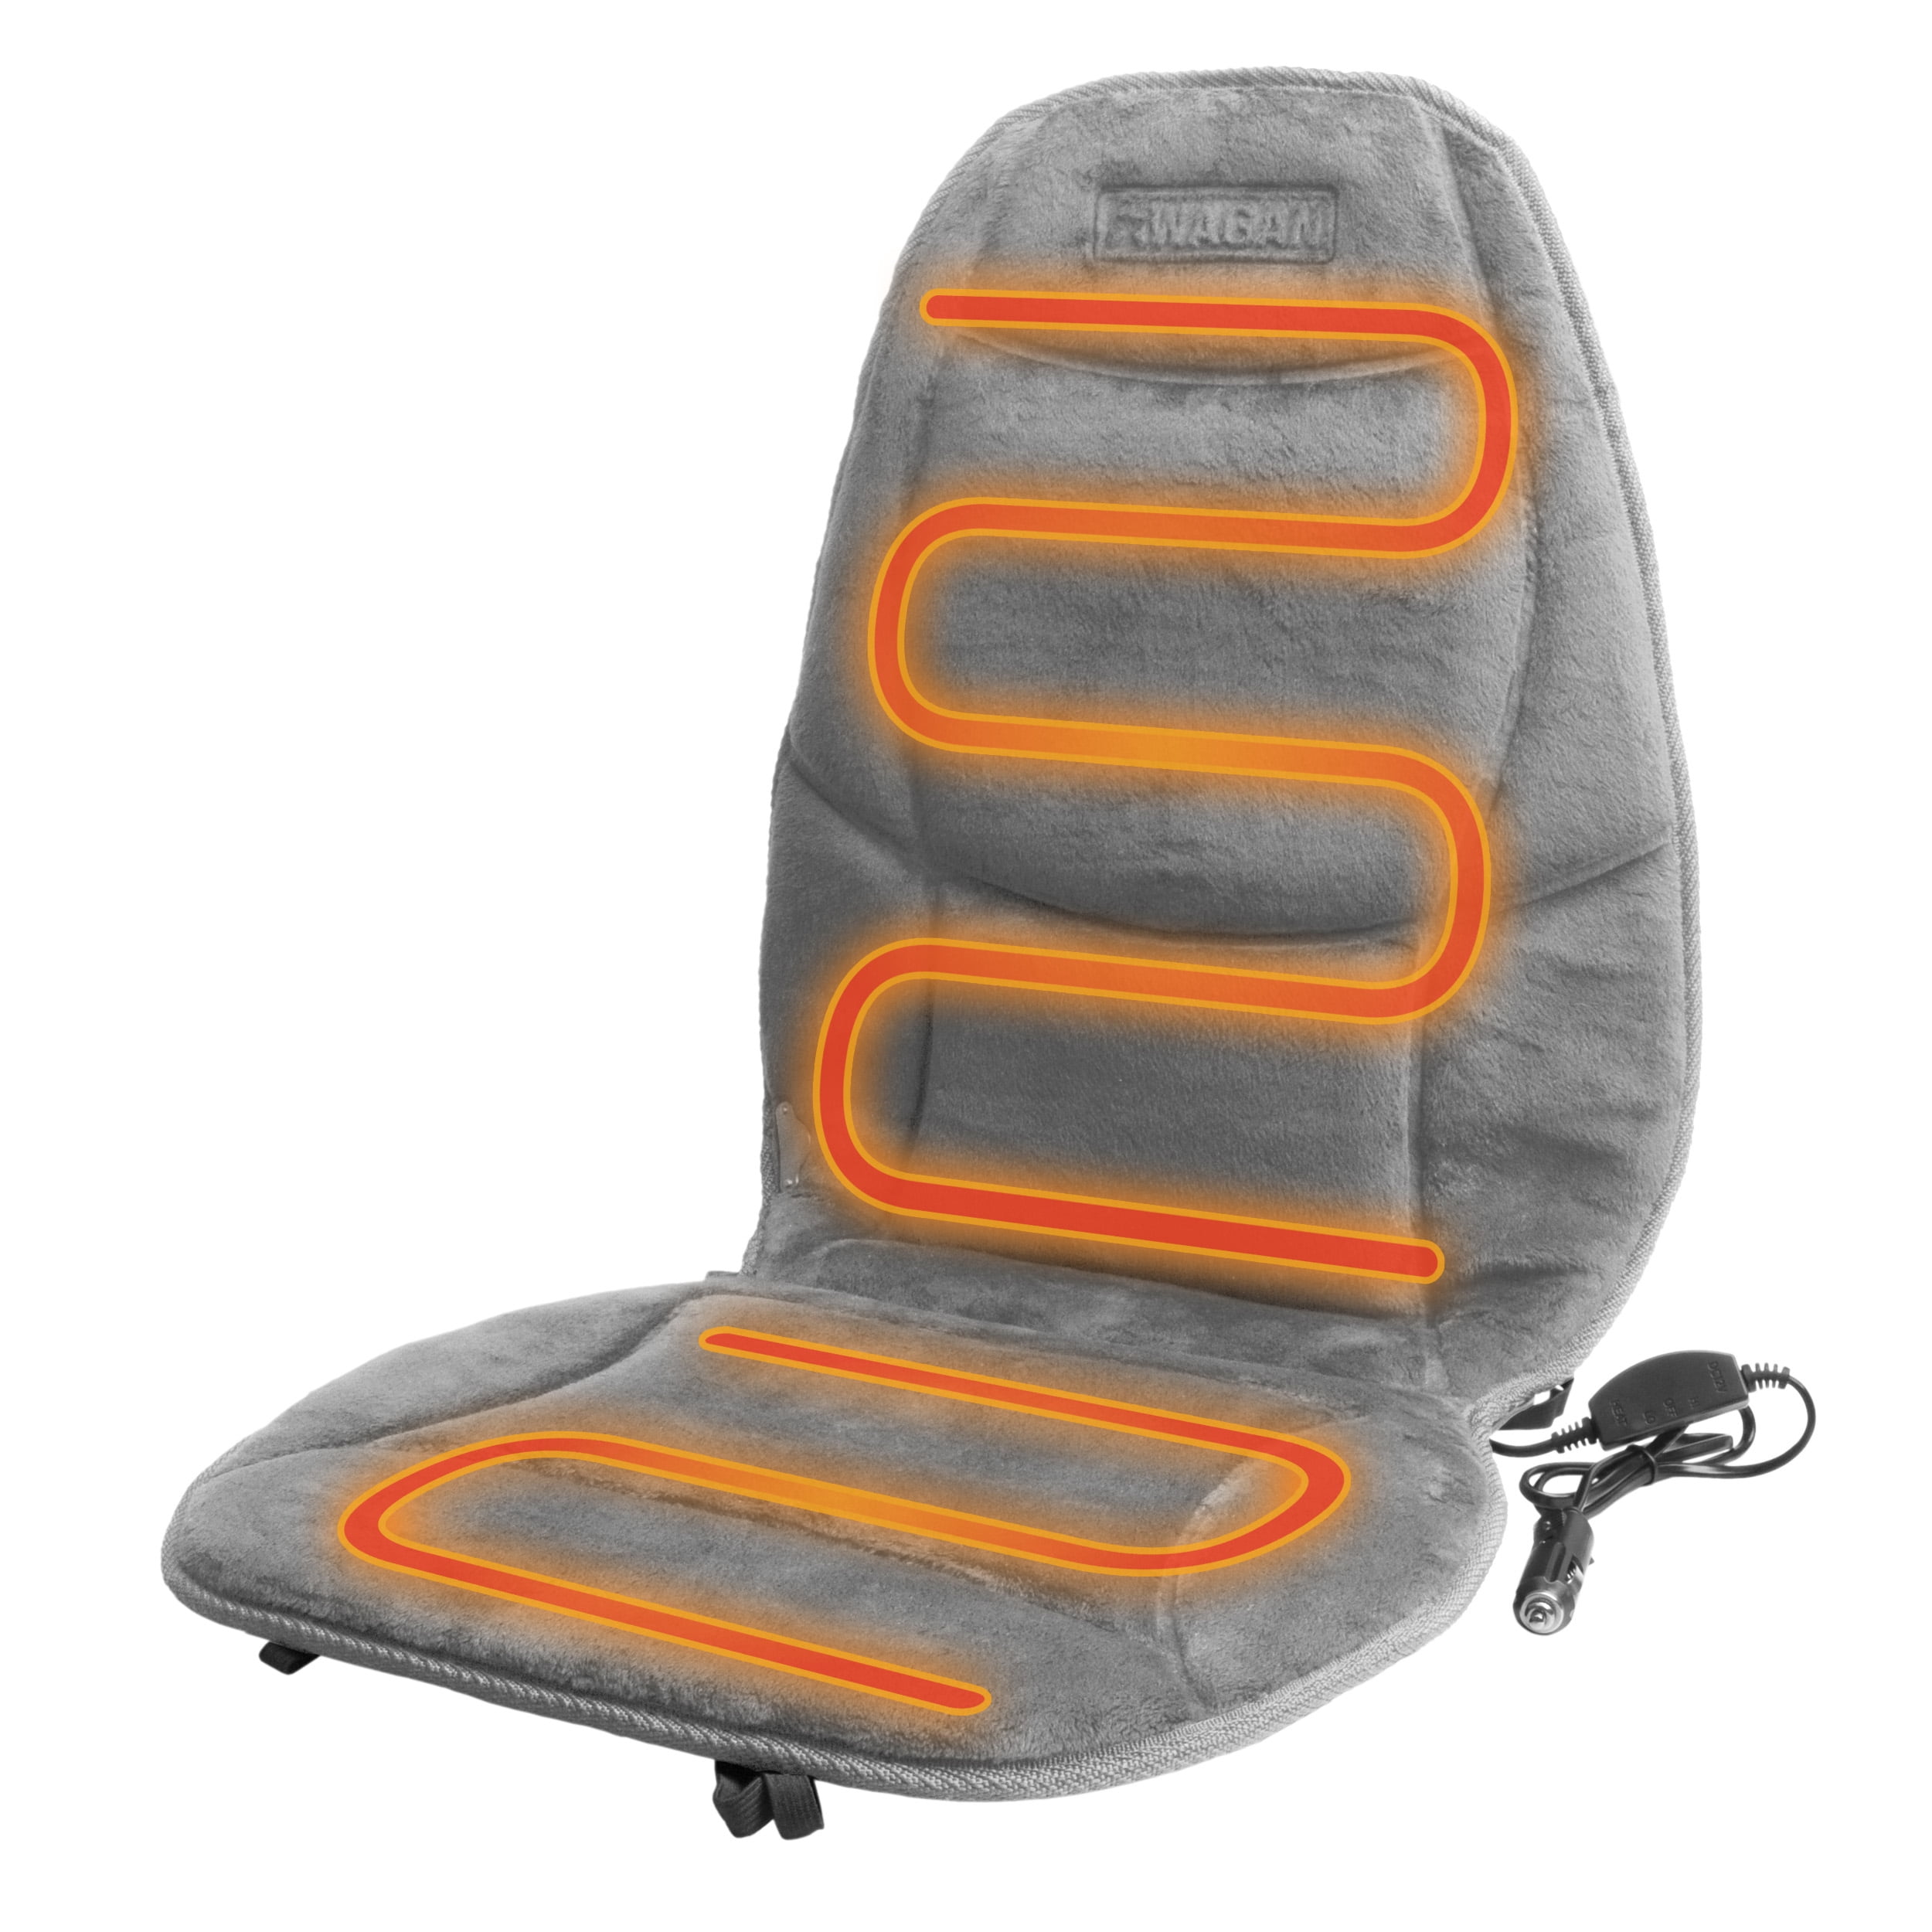 Baby Car Seat Heated Cover Pad Electric Safety Heating Seat Cushion for Children 